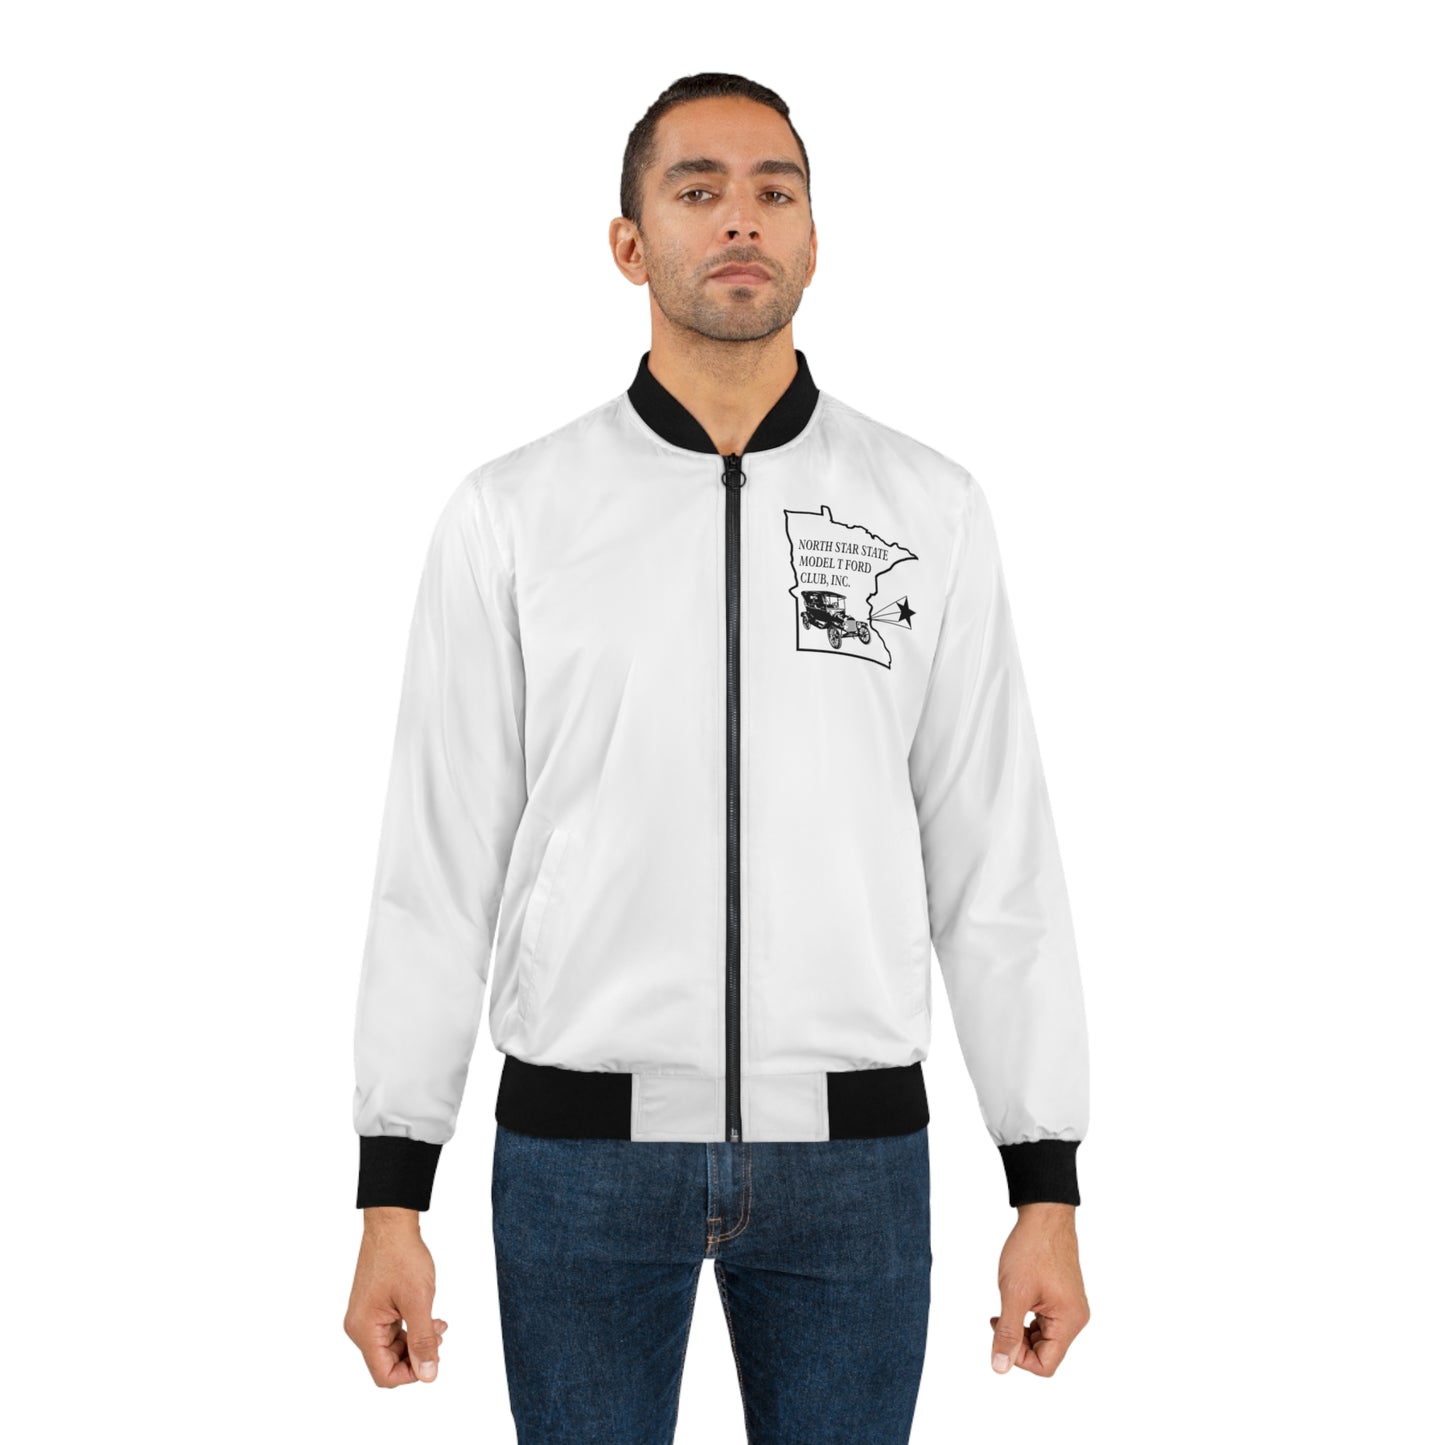 North Star State Model T Ford Club, Inc. Men's Bomber Jacket (AOP)